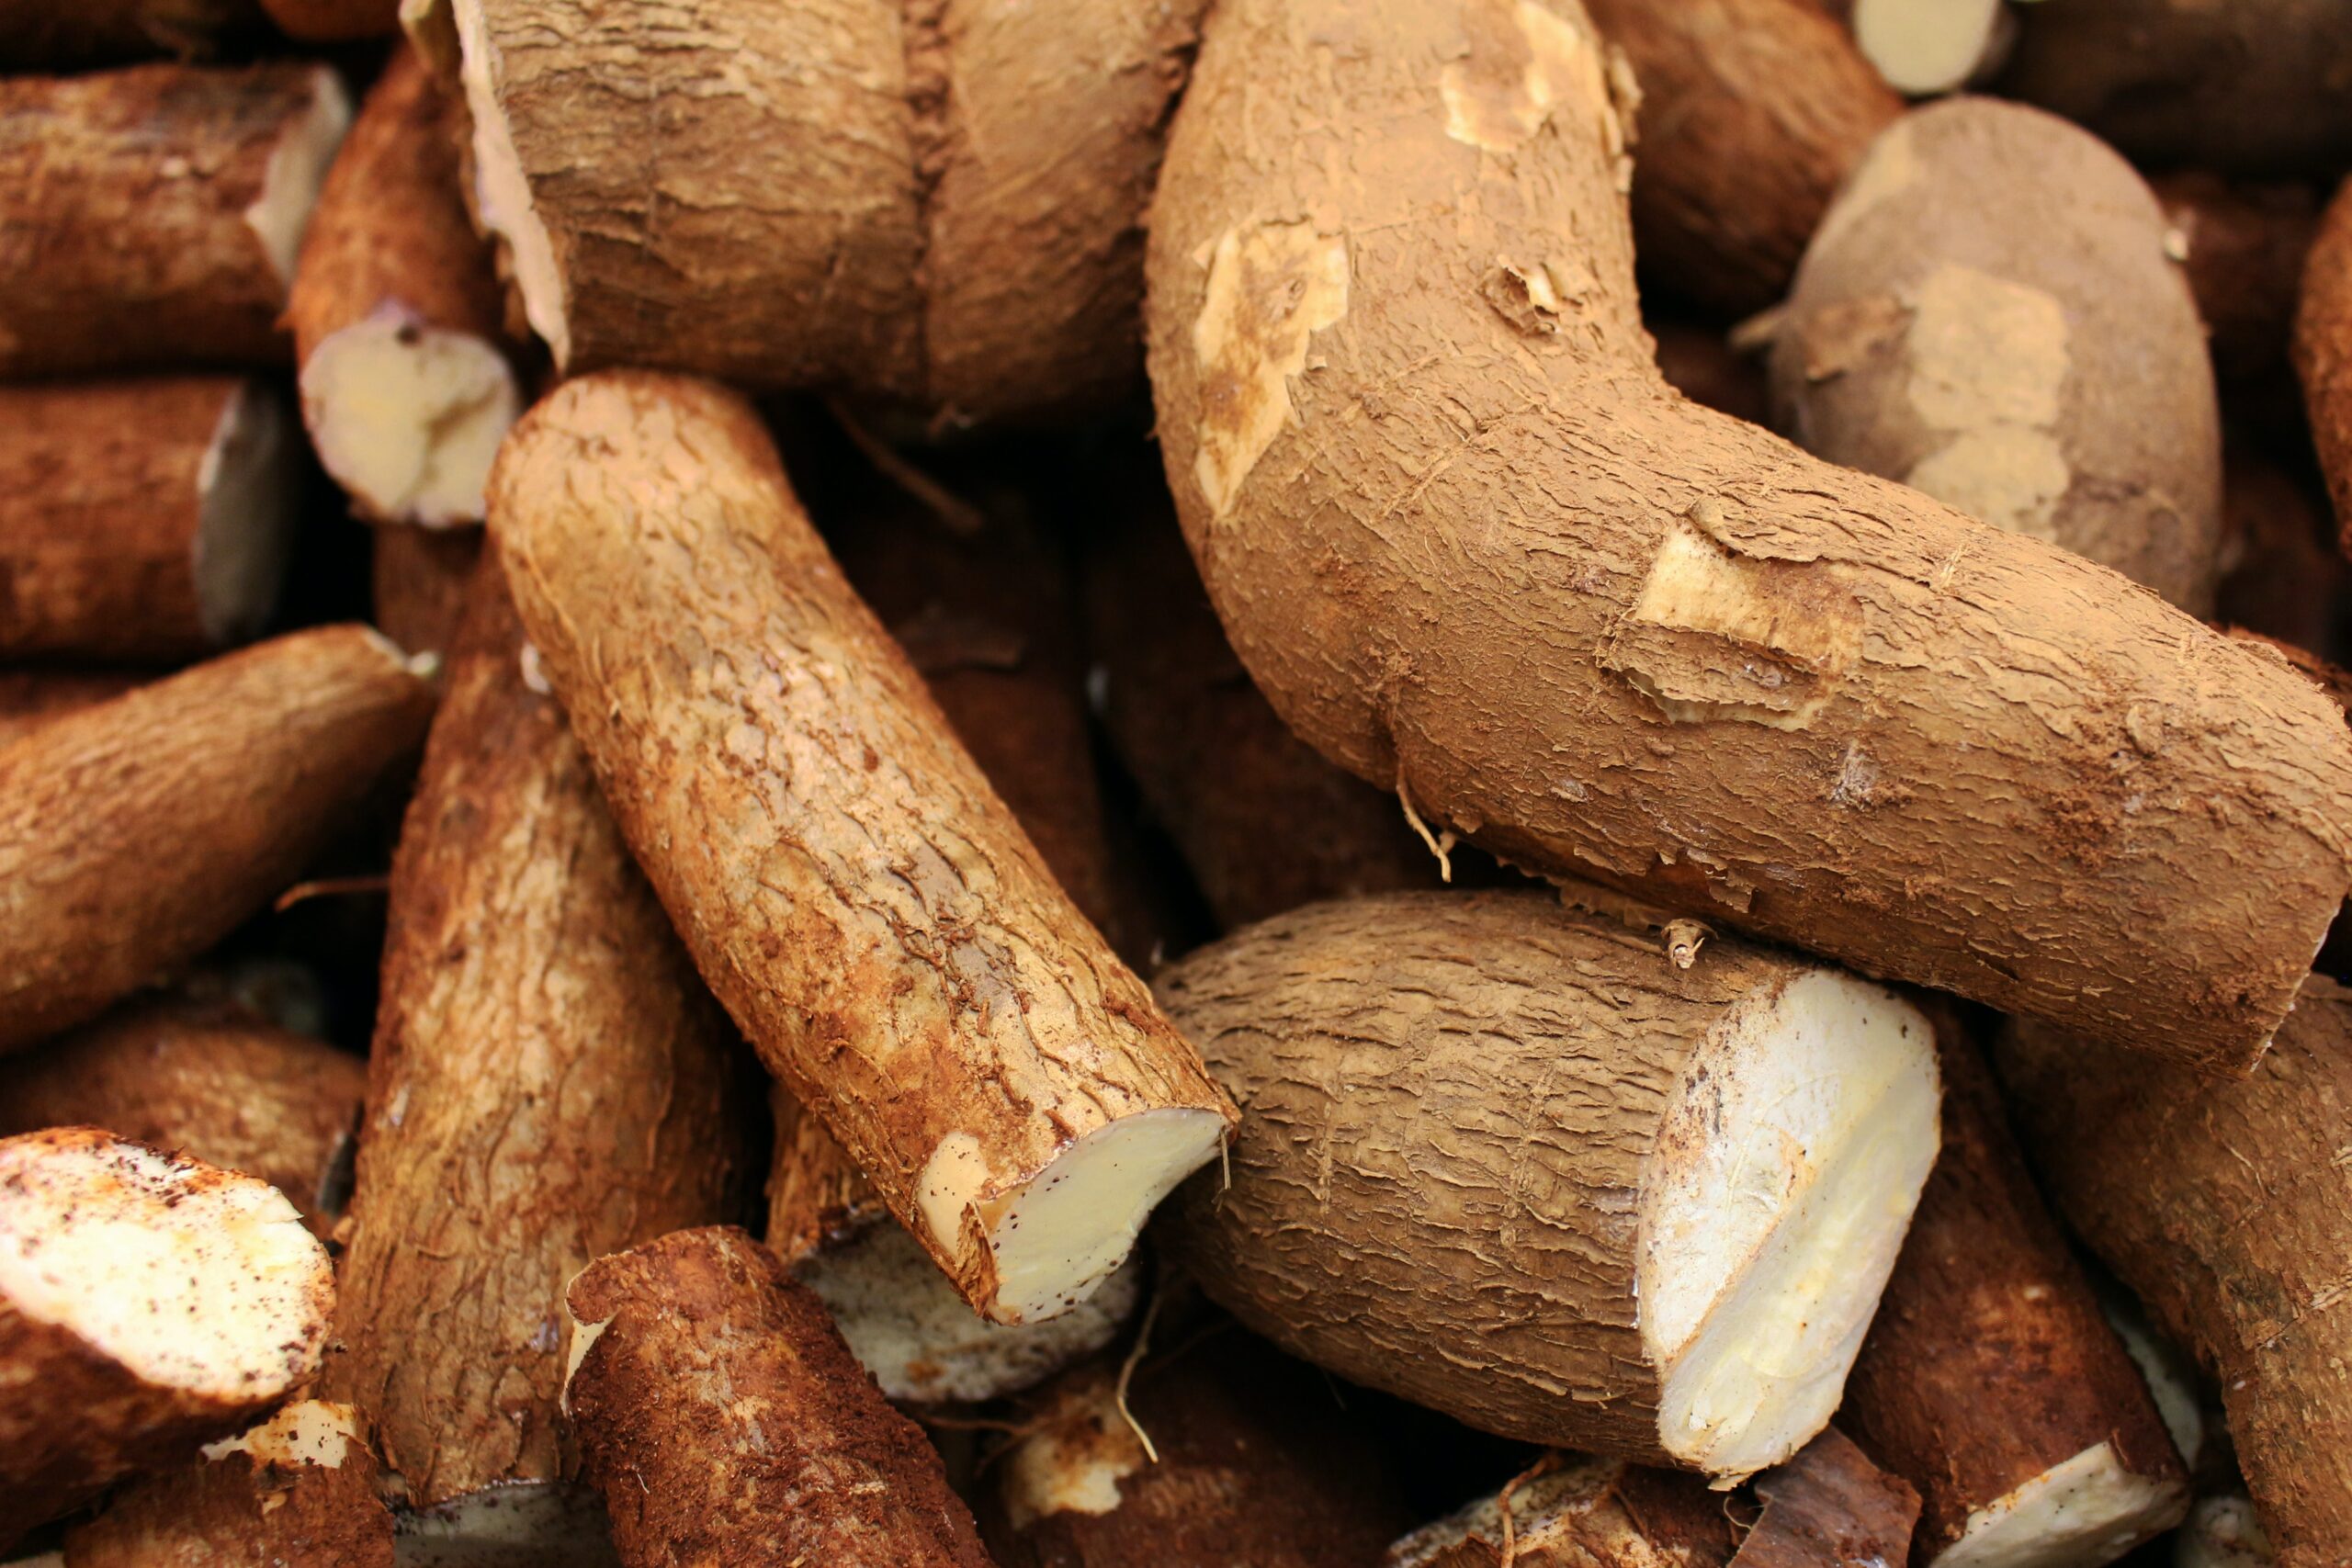 Improving the quality and safety of cassava derivatives in West Africa through accreditation of product certification bodies and testing laboratories under the ILAC MRA/IAF MLA